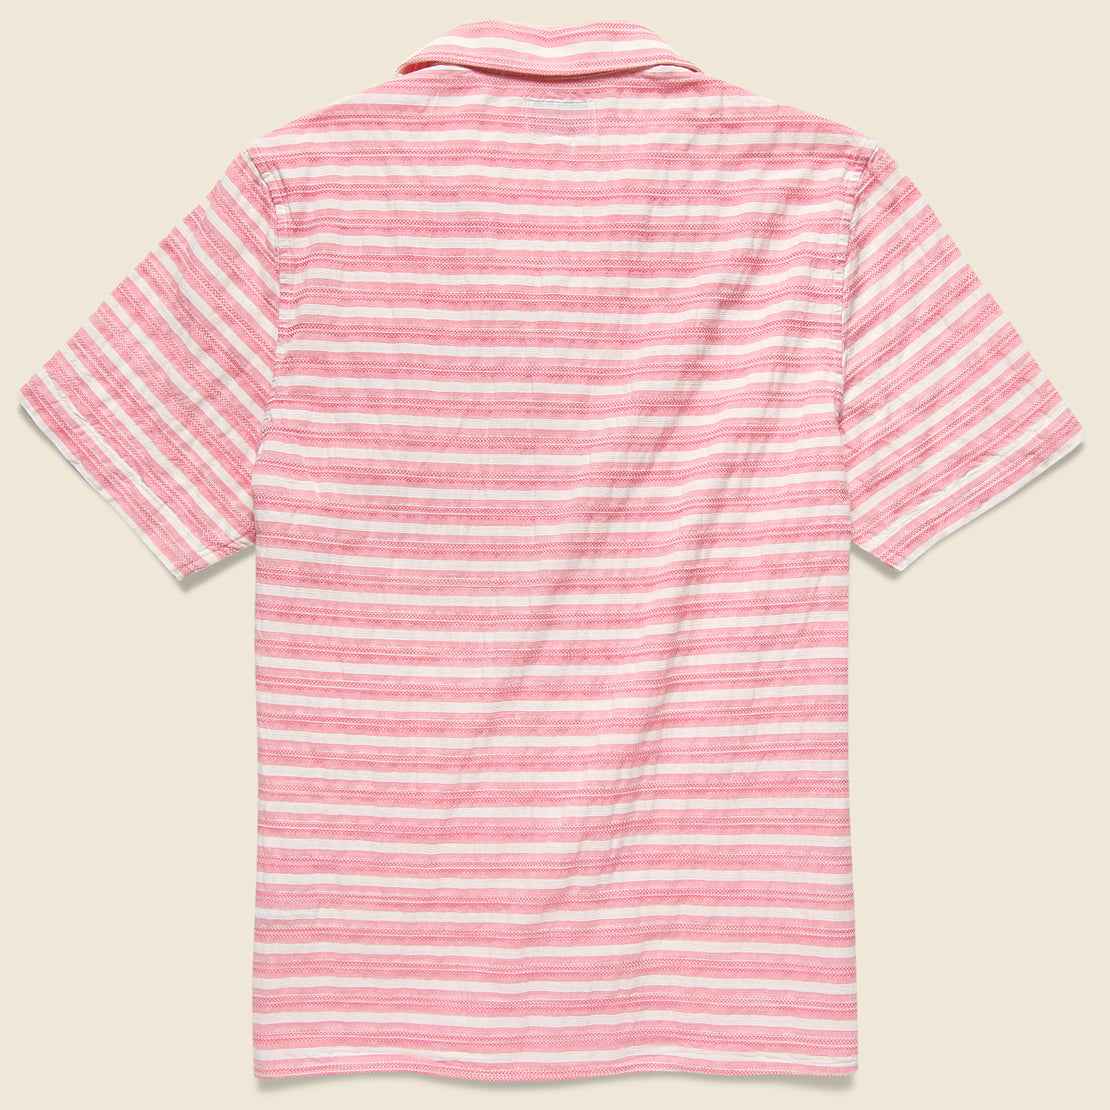 Hook Shirt - Pink - Penfield - STAG Provisions - Tops - S/S Woven - Stripe